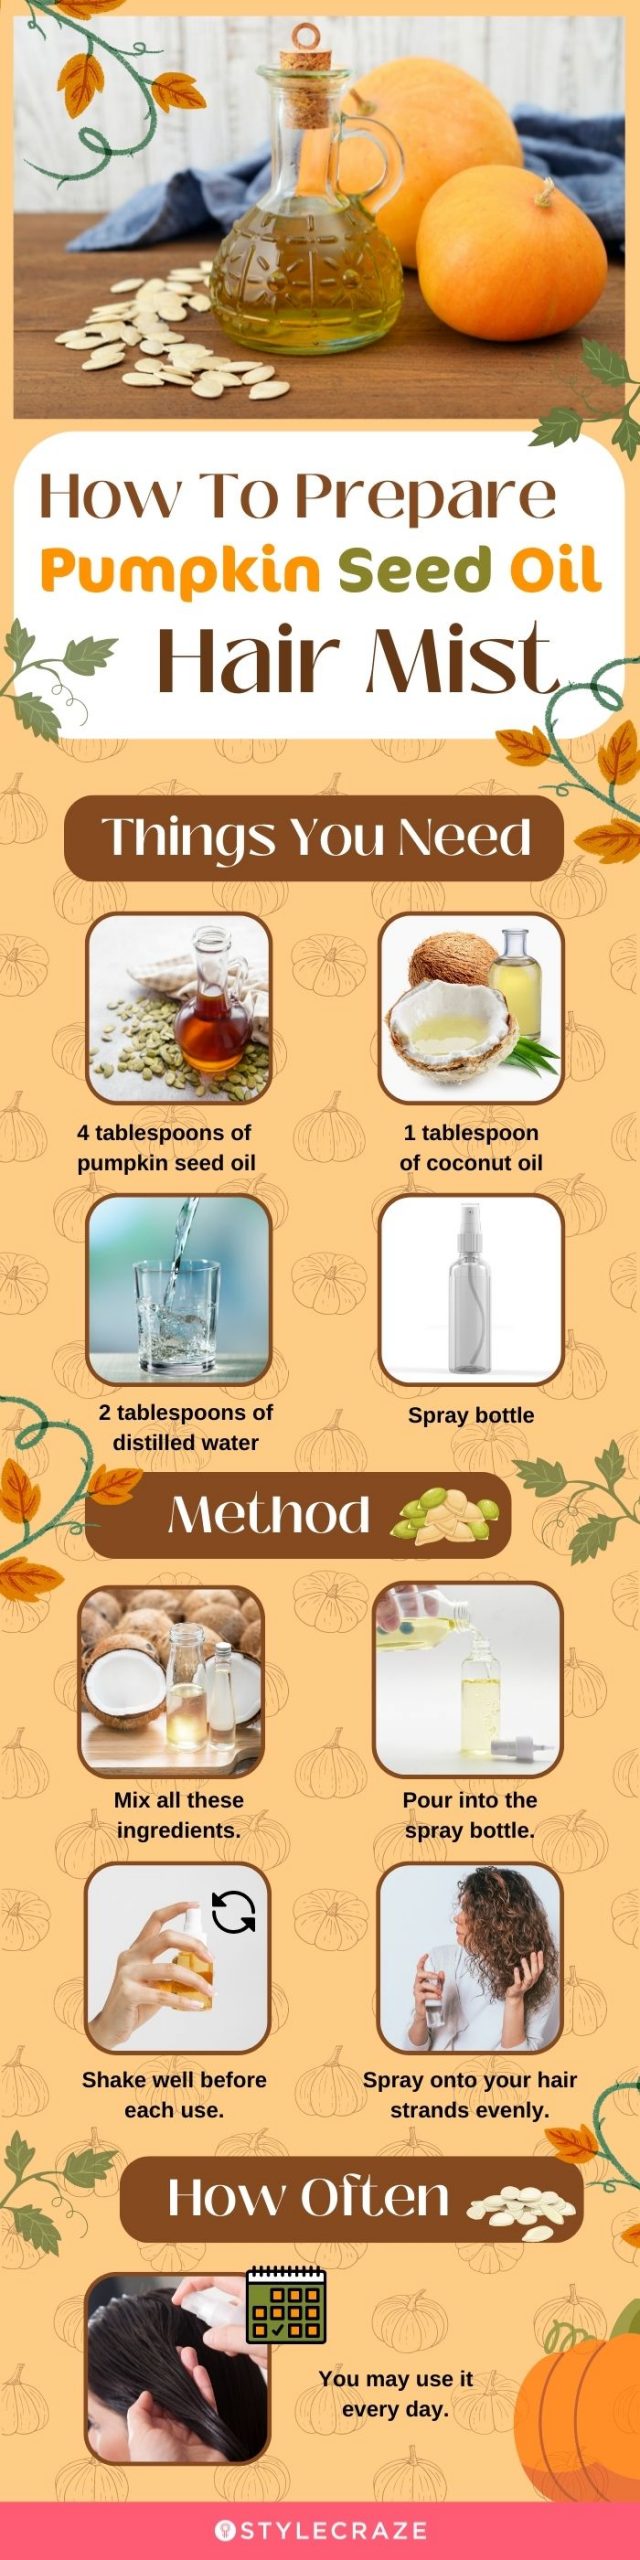 how to prepare pumpkin seed oil hair mist (infographic)